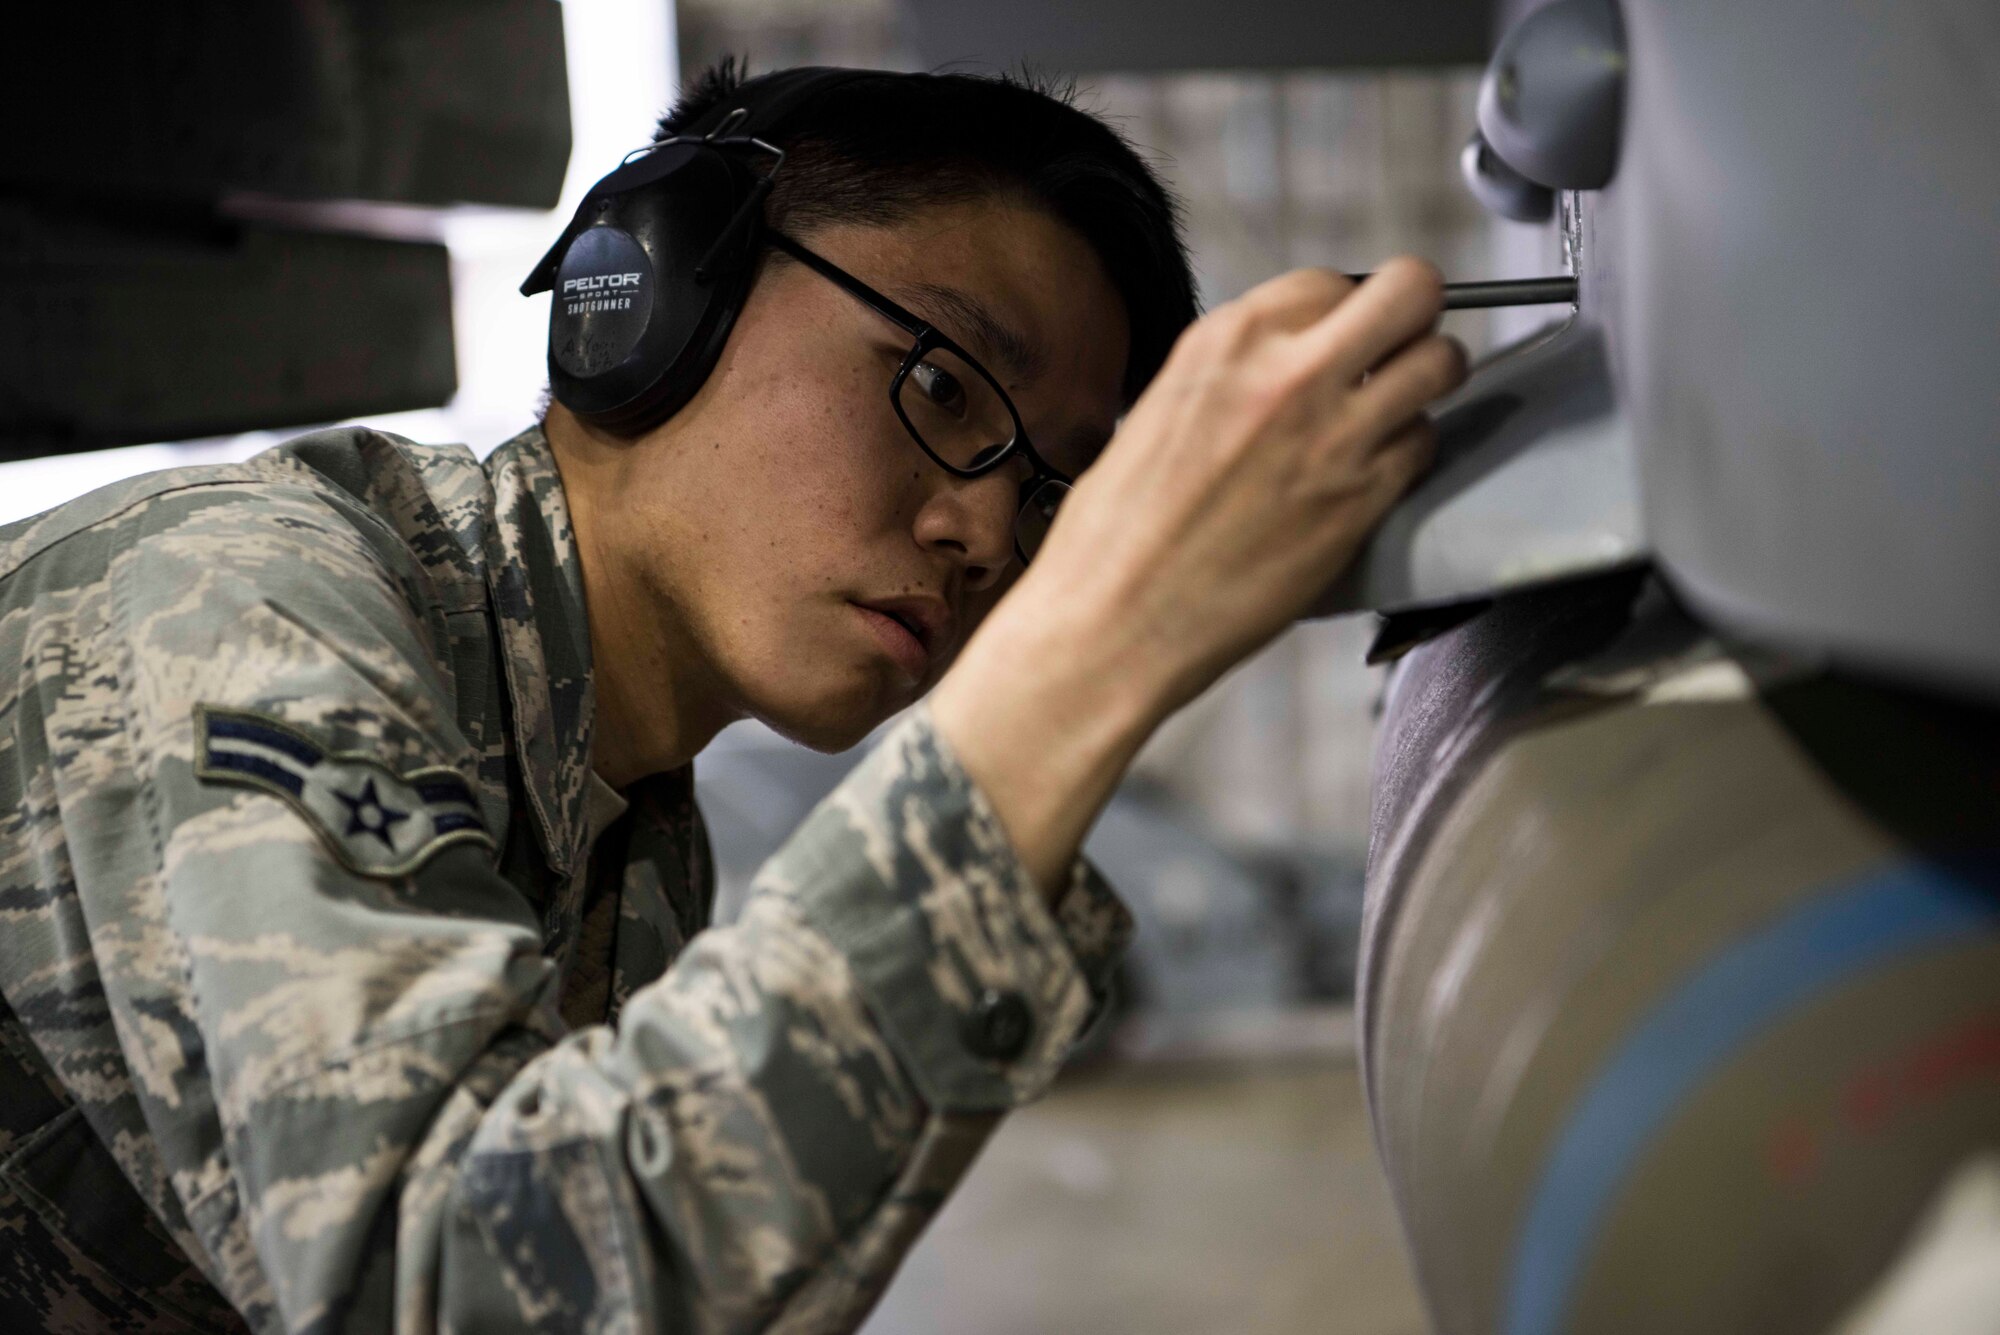 U.S. Air Force Airman 1st Class Aaron Yogi, a 14th Aircraft Maintenance Unit load crew member, performs a mechanical inspection with a pin during the third quarter load competition at Misawa Air Base, Japan, Nov. 9, 2018. This crucial step ensures loaded munitions are properly secured onto the aircraft. (U.S. Air Force photo by Airman 1st Class Collette Brooks)